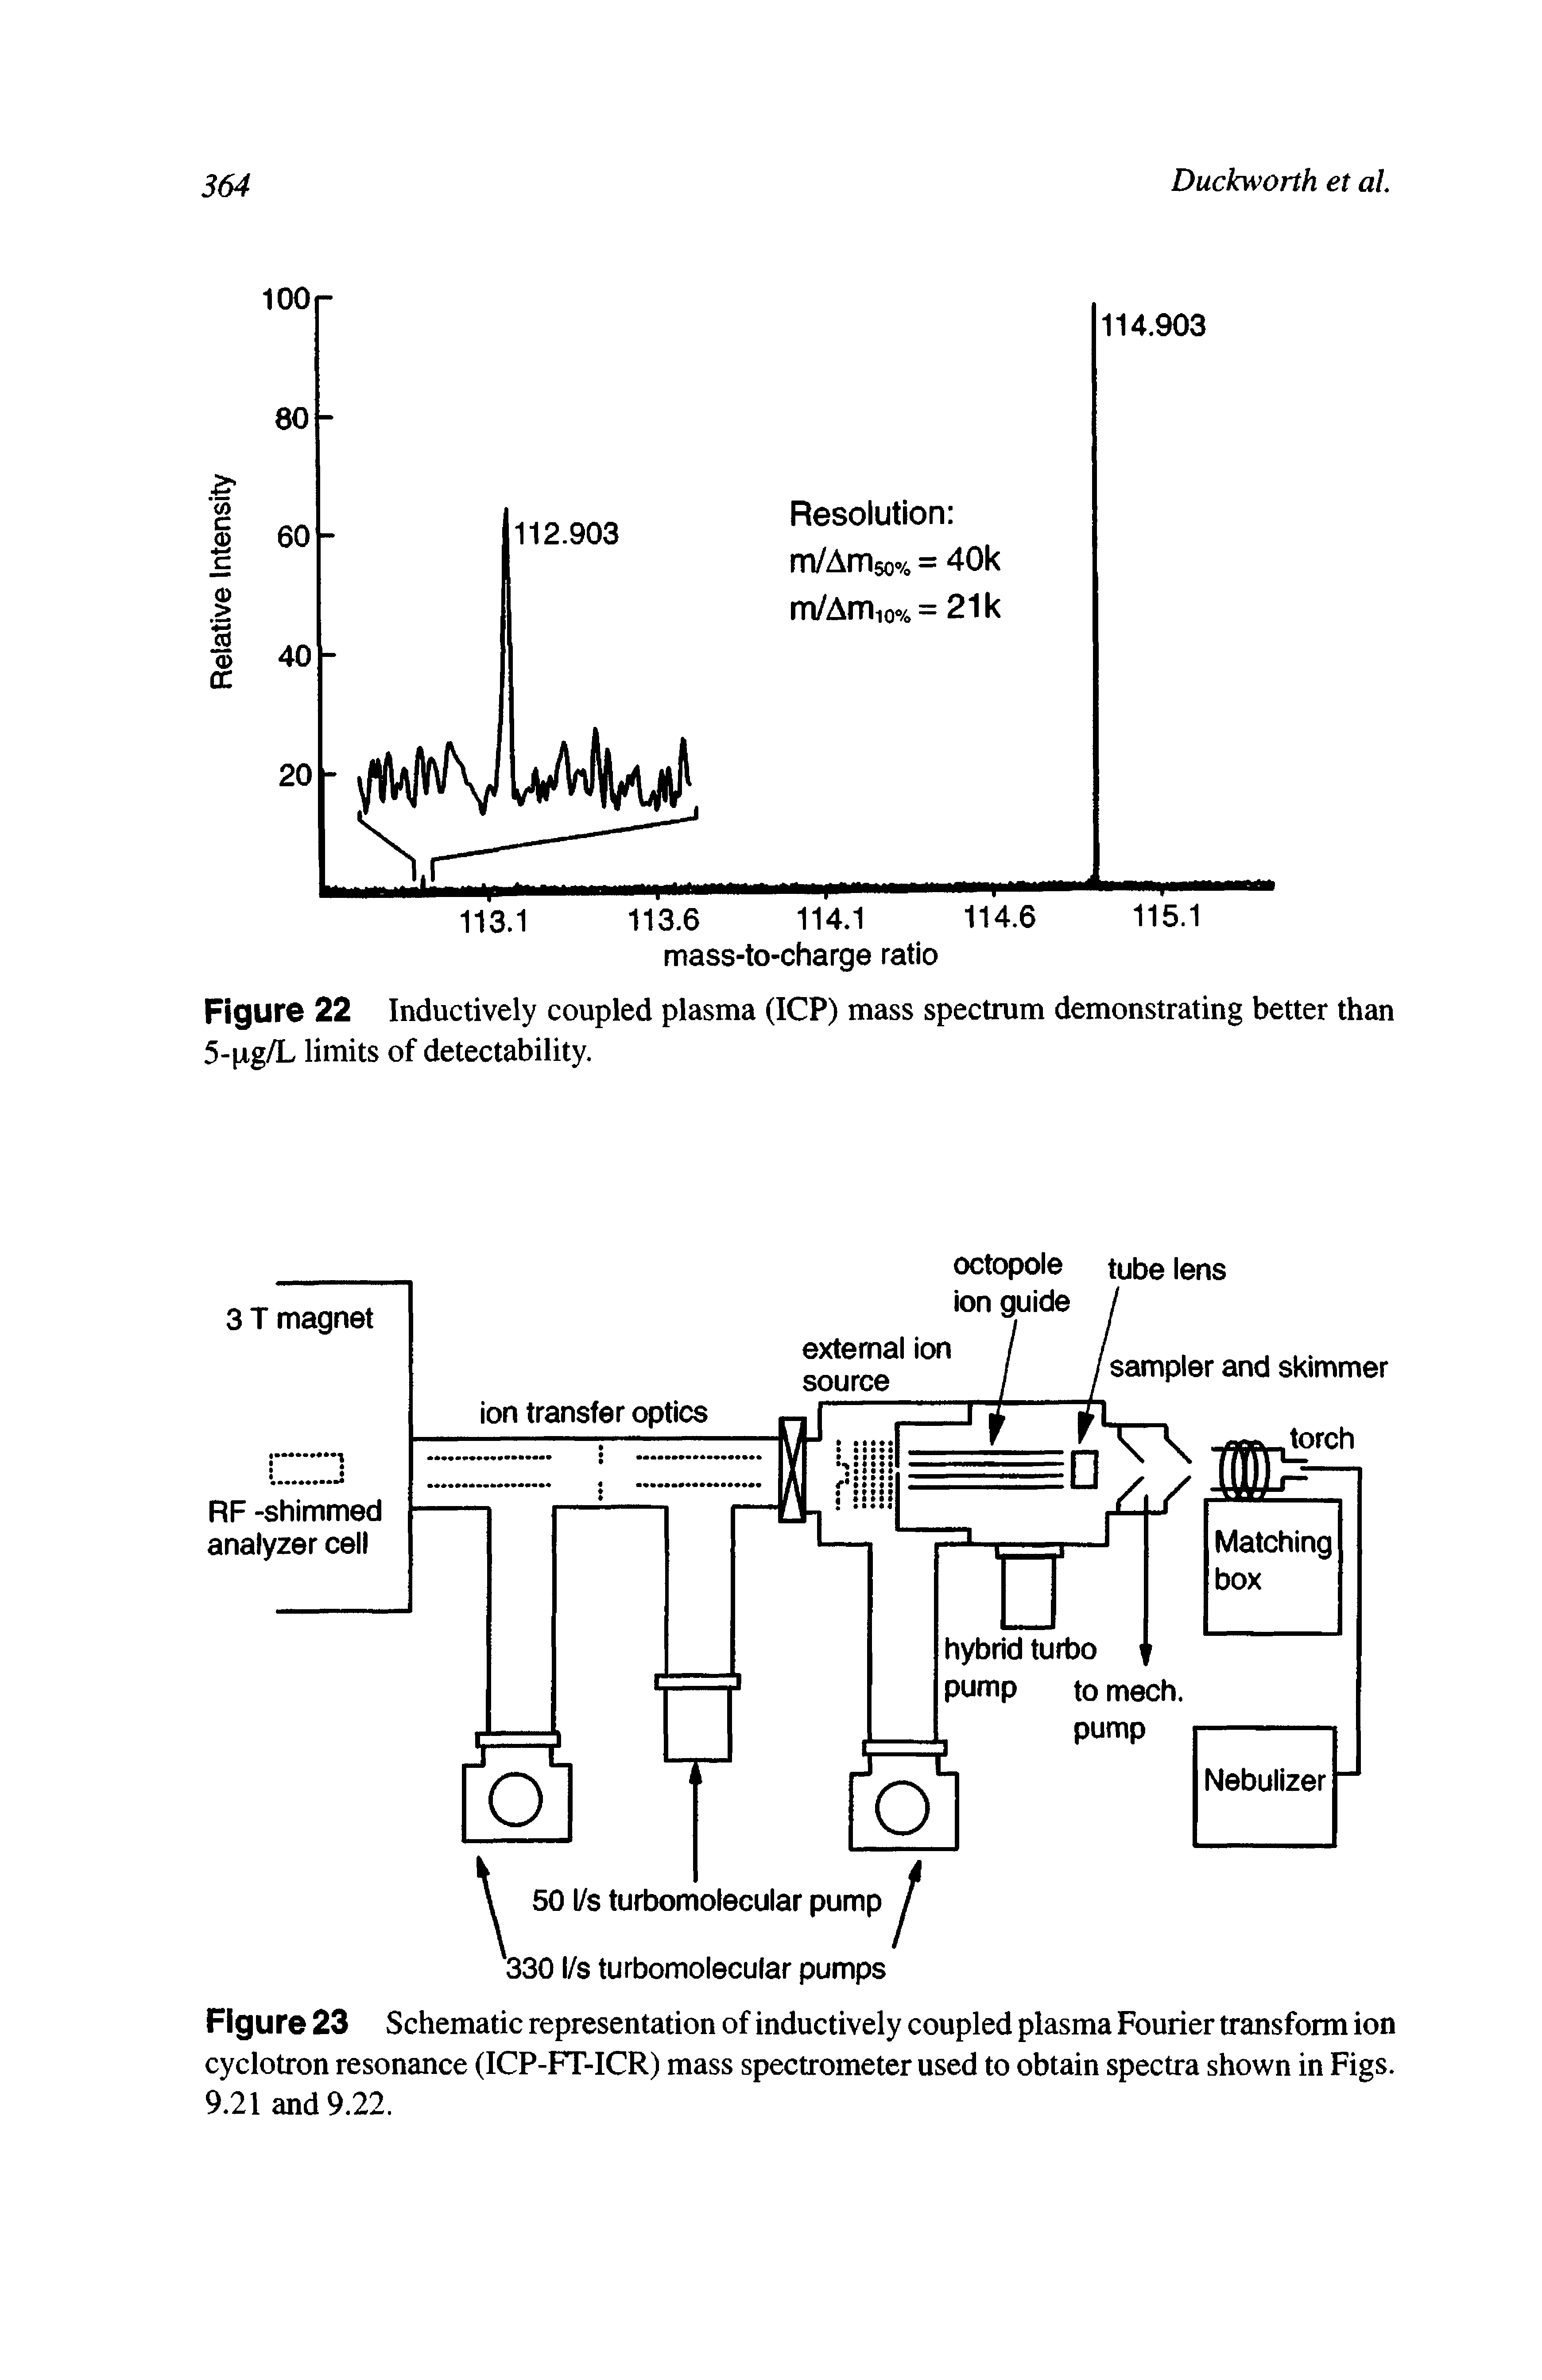 Figure 23 Schematic representation of inductively coupled plasma Fourier transform ion cyclotron resonance (ICP-FT-ICR) mass spectrometer used to obtain spectra shown in Figs. 9.21 and 9.22.